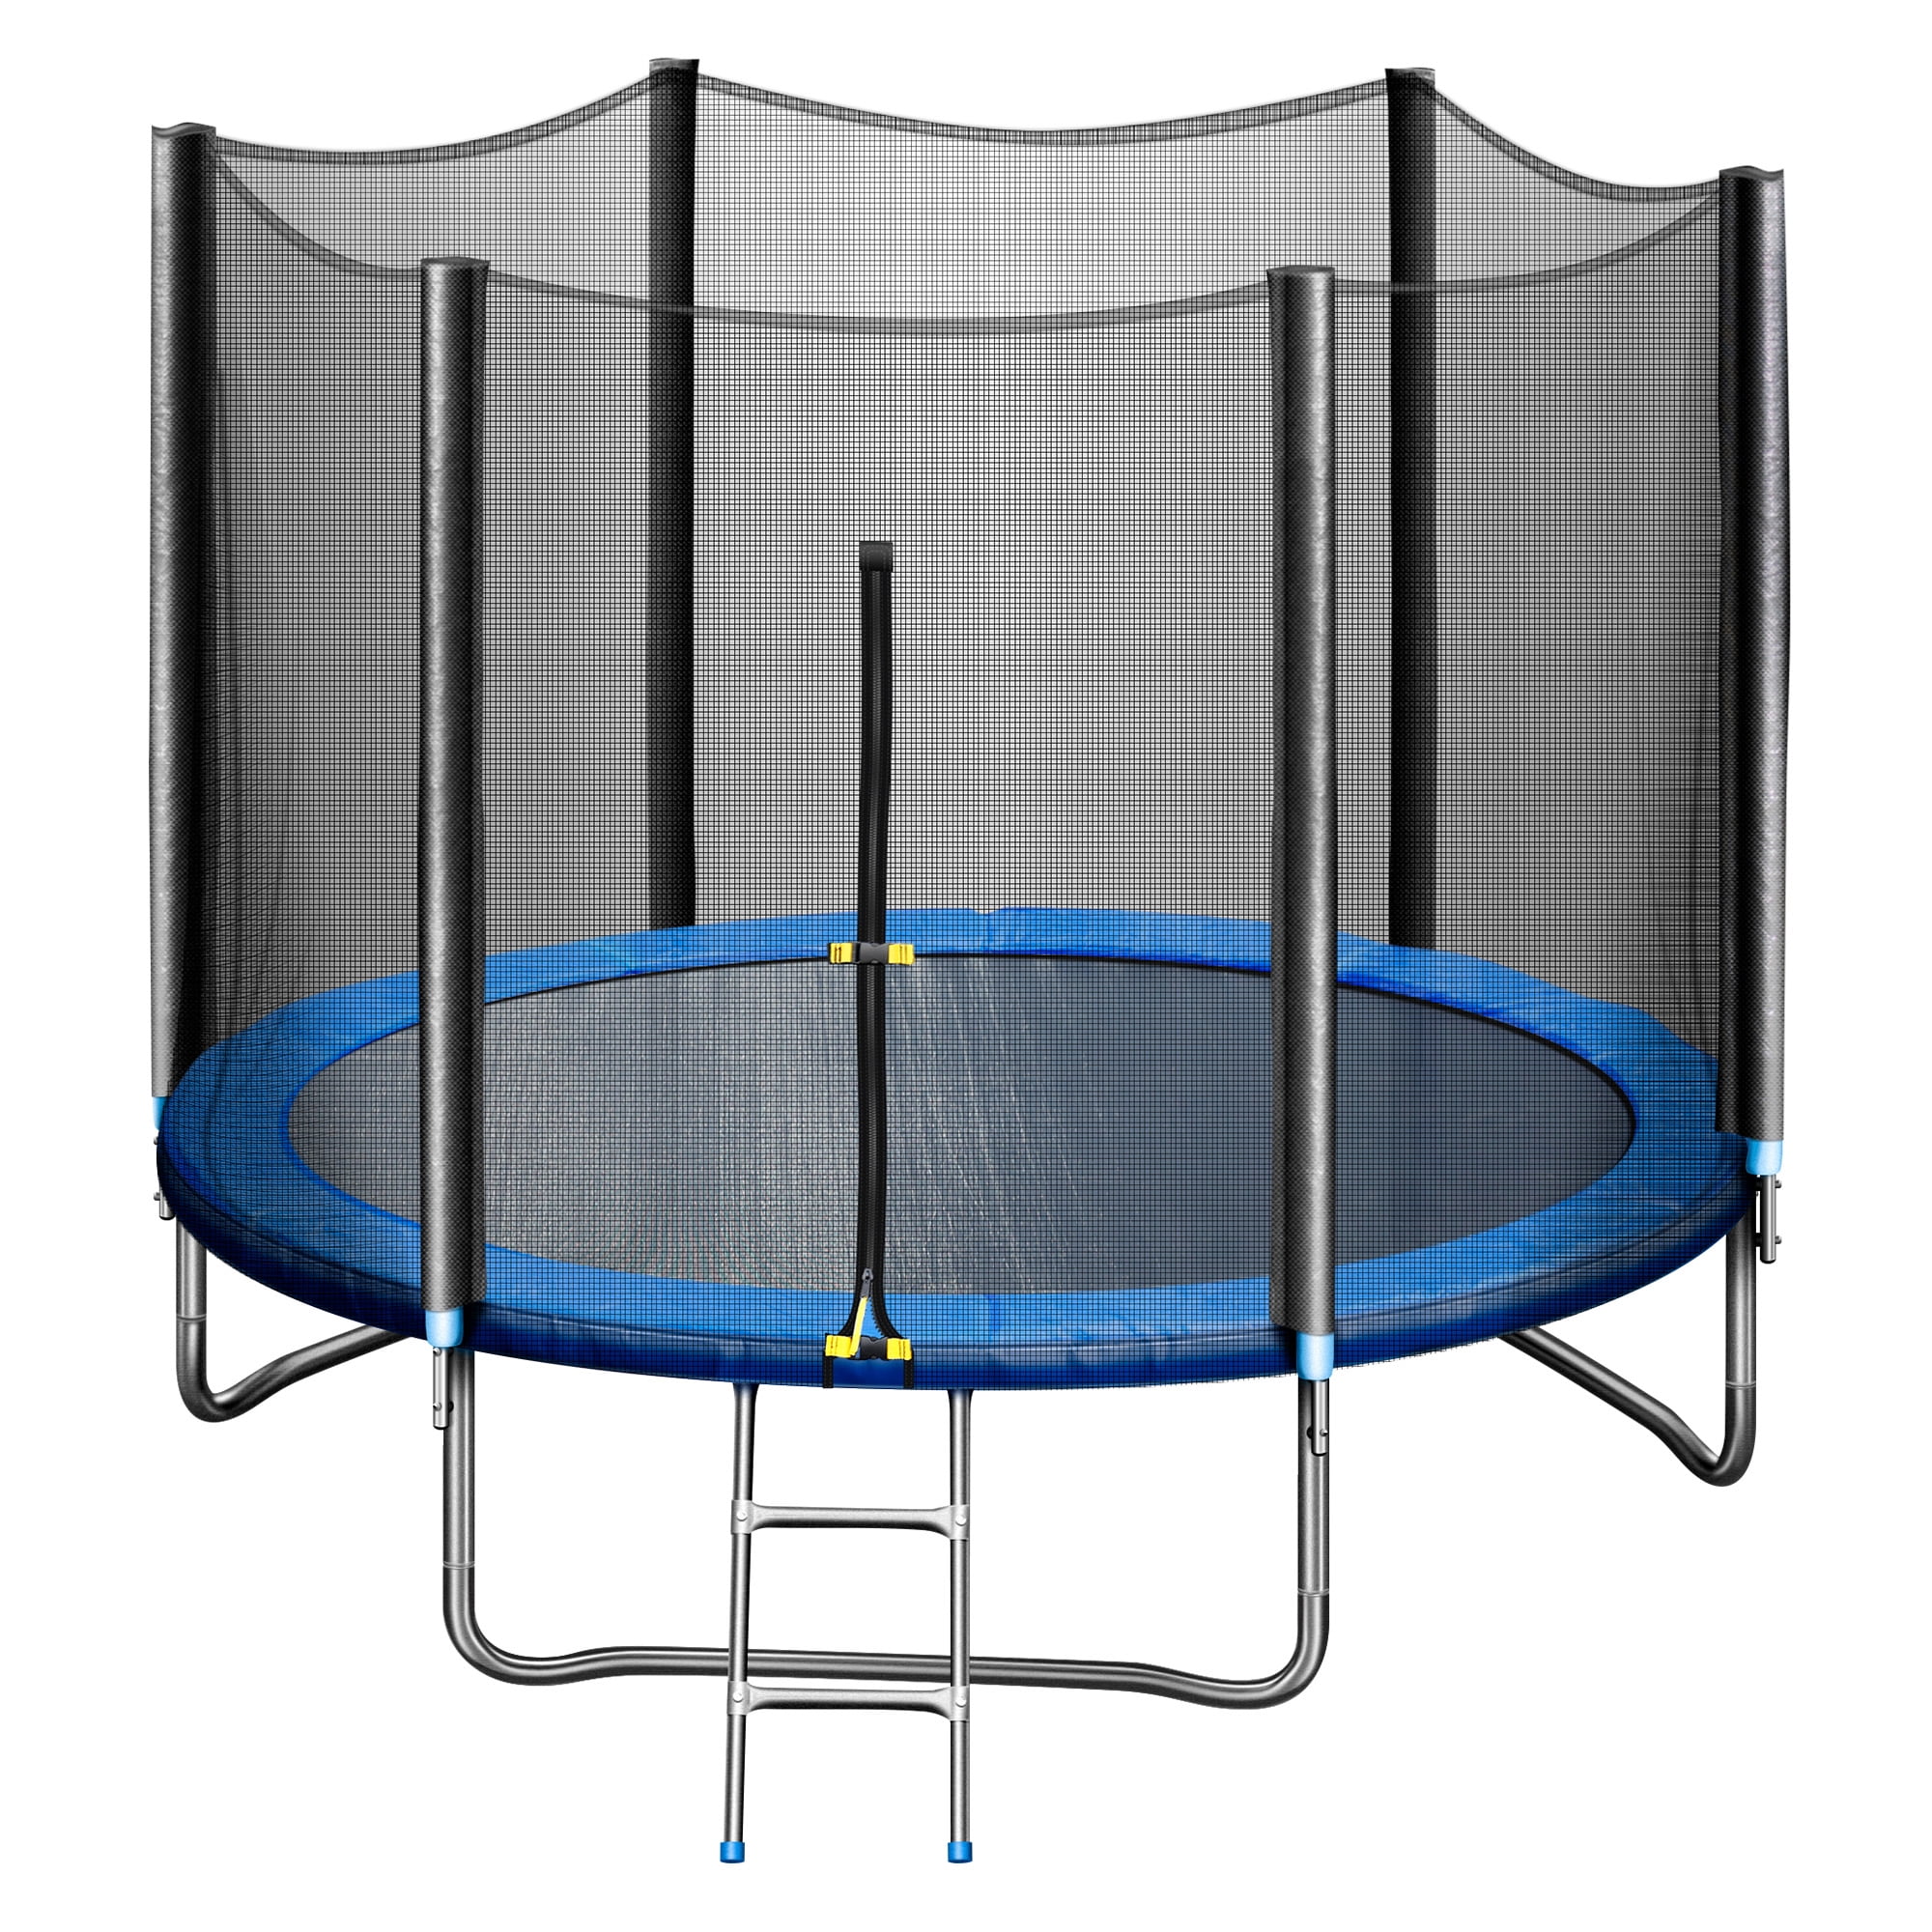 GoolRC 10FT Recreational Trampoline with Enclosure Net, Waterproof Jumping Mat,Simple Ladder,Max Weight Capacity 661 LB for 3-4 Kids,Blue